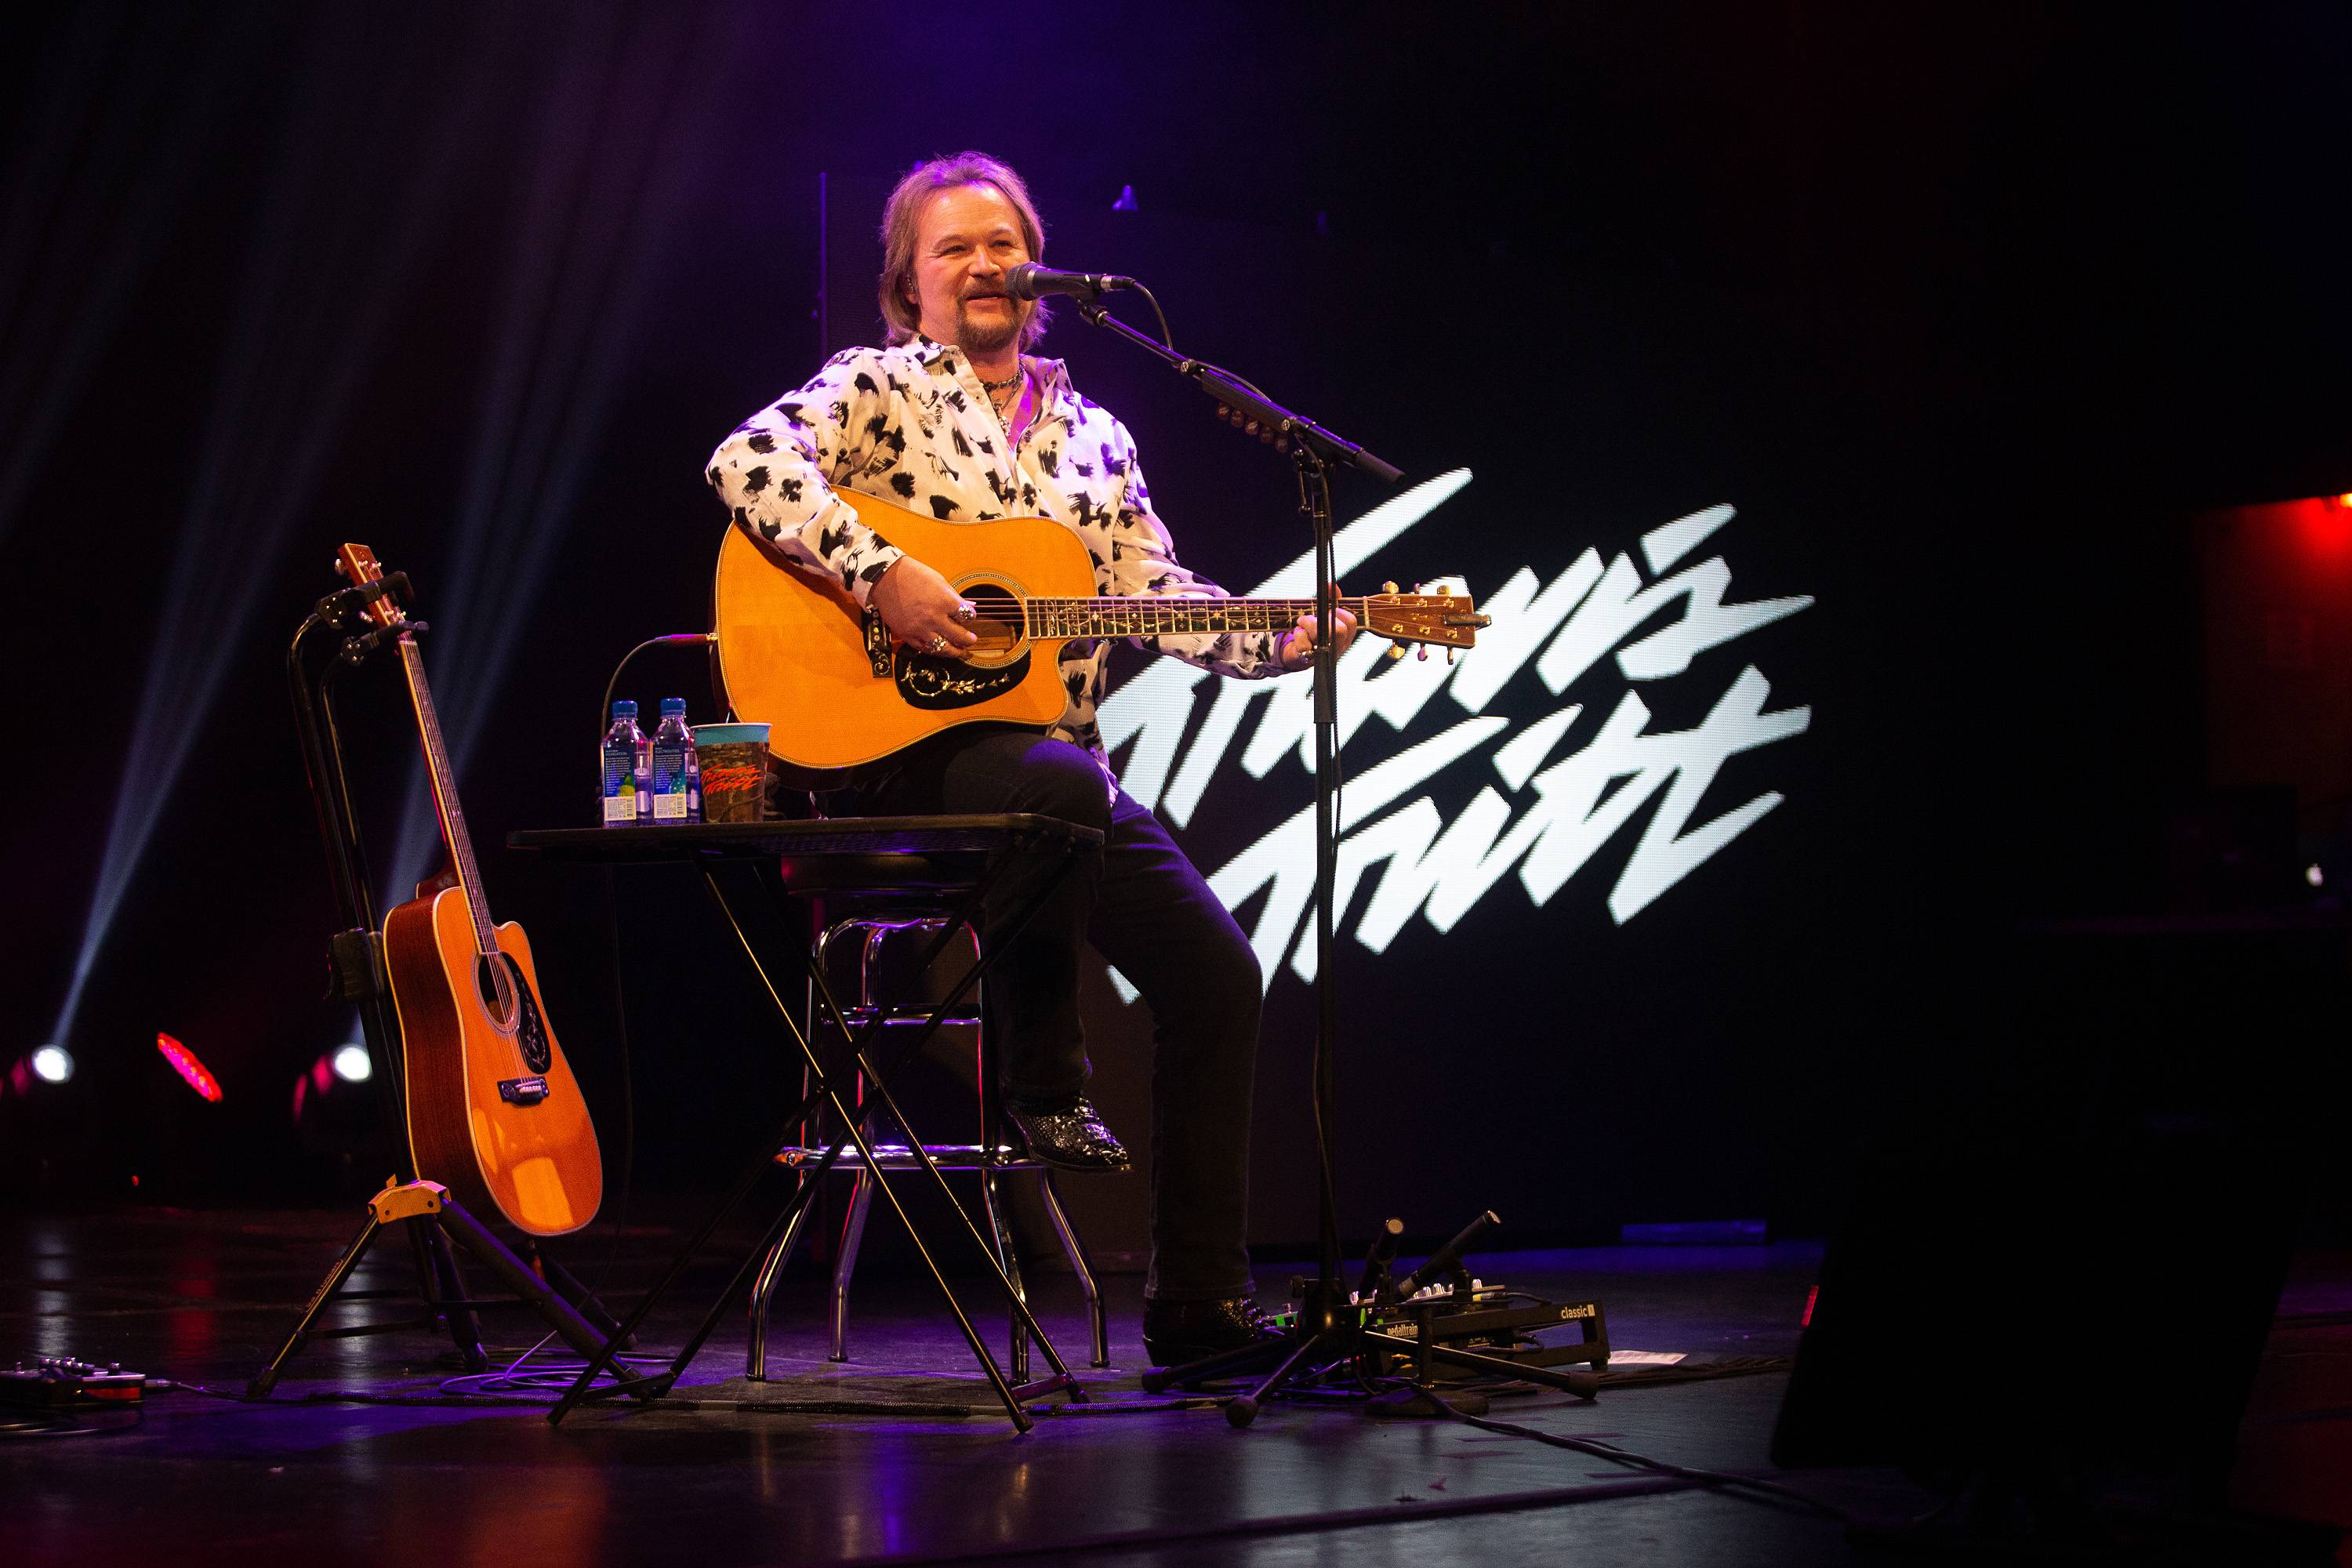 Country singer Travis Tritt involved in fatal car accident